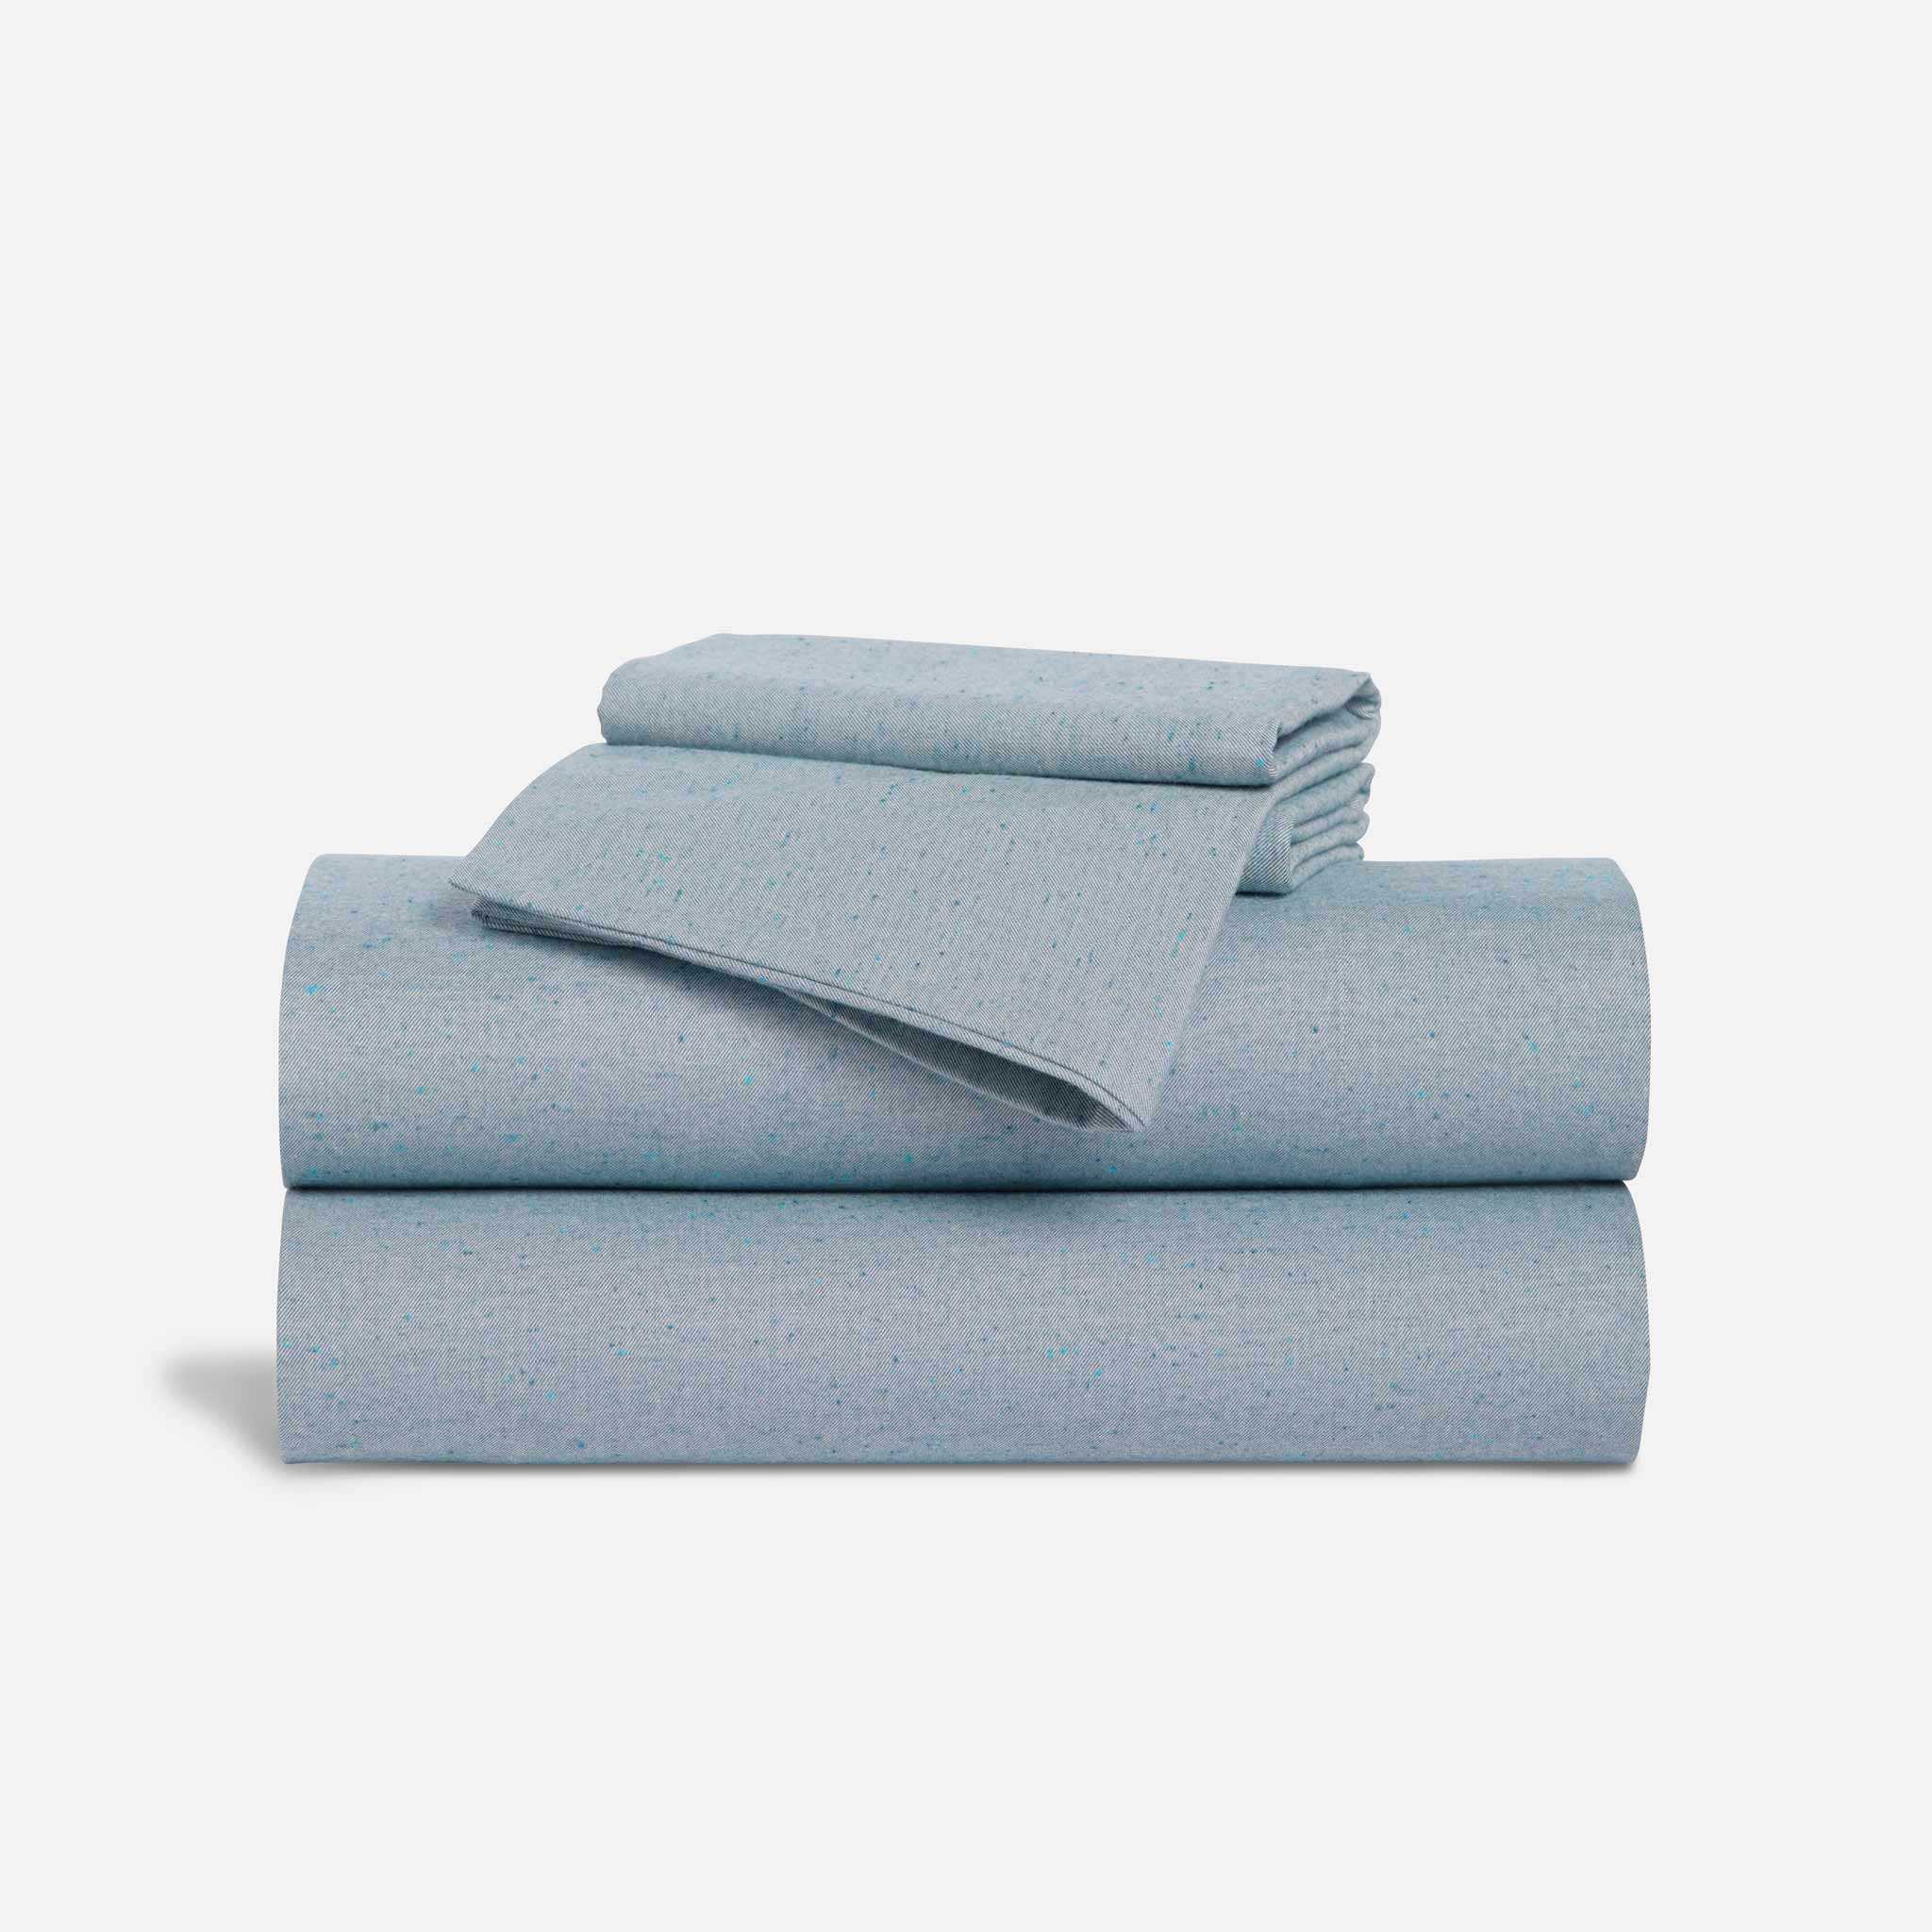 Best Flannel Sheets: 9 Quality Sets to Keep You Warm All Winter